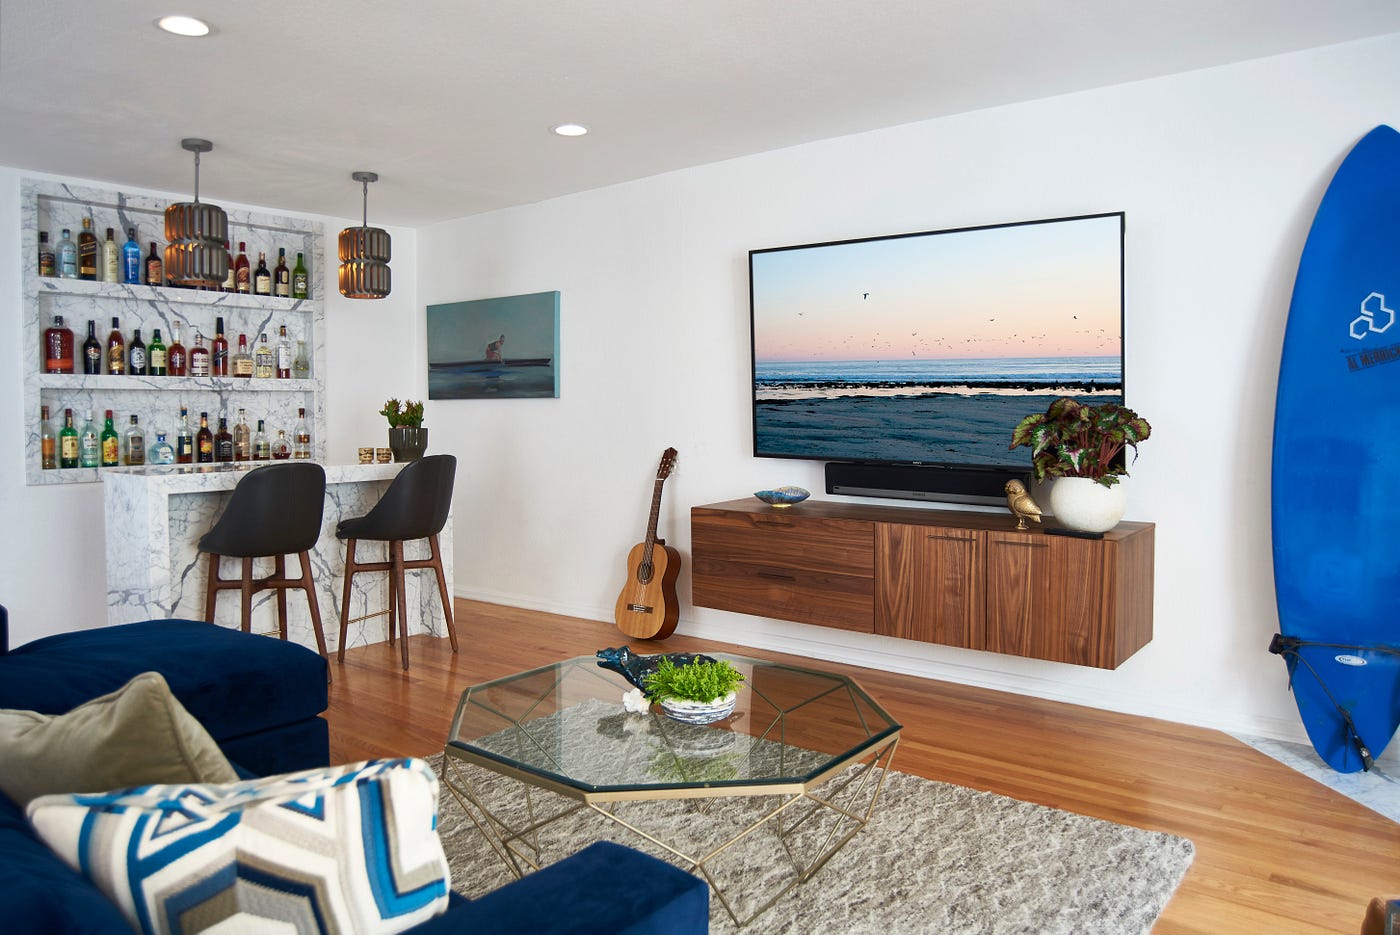 A living room with a blue couch, glass coffee table, and beige rug. On the wall facing the couch, there is a wall mounted television with a wall mounted media console, a blue surfboard and a guitar. There is also a home bar visible in the background.